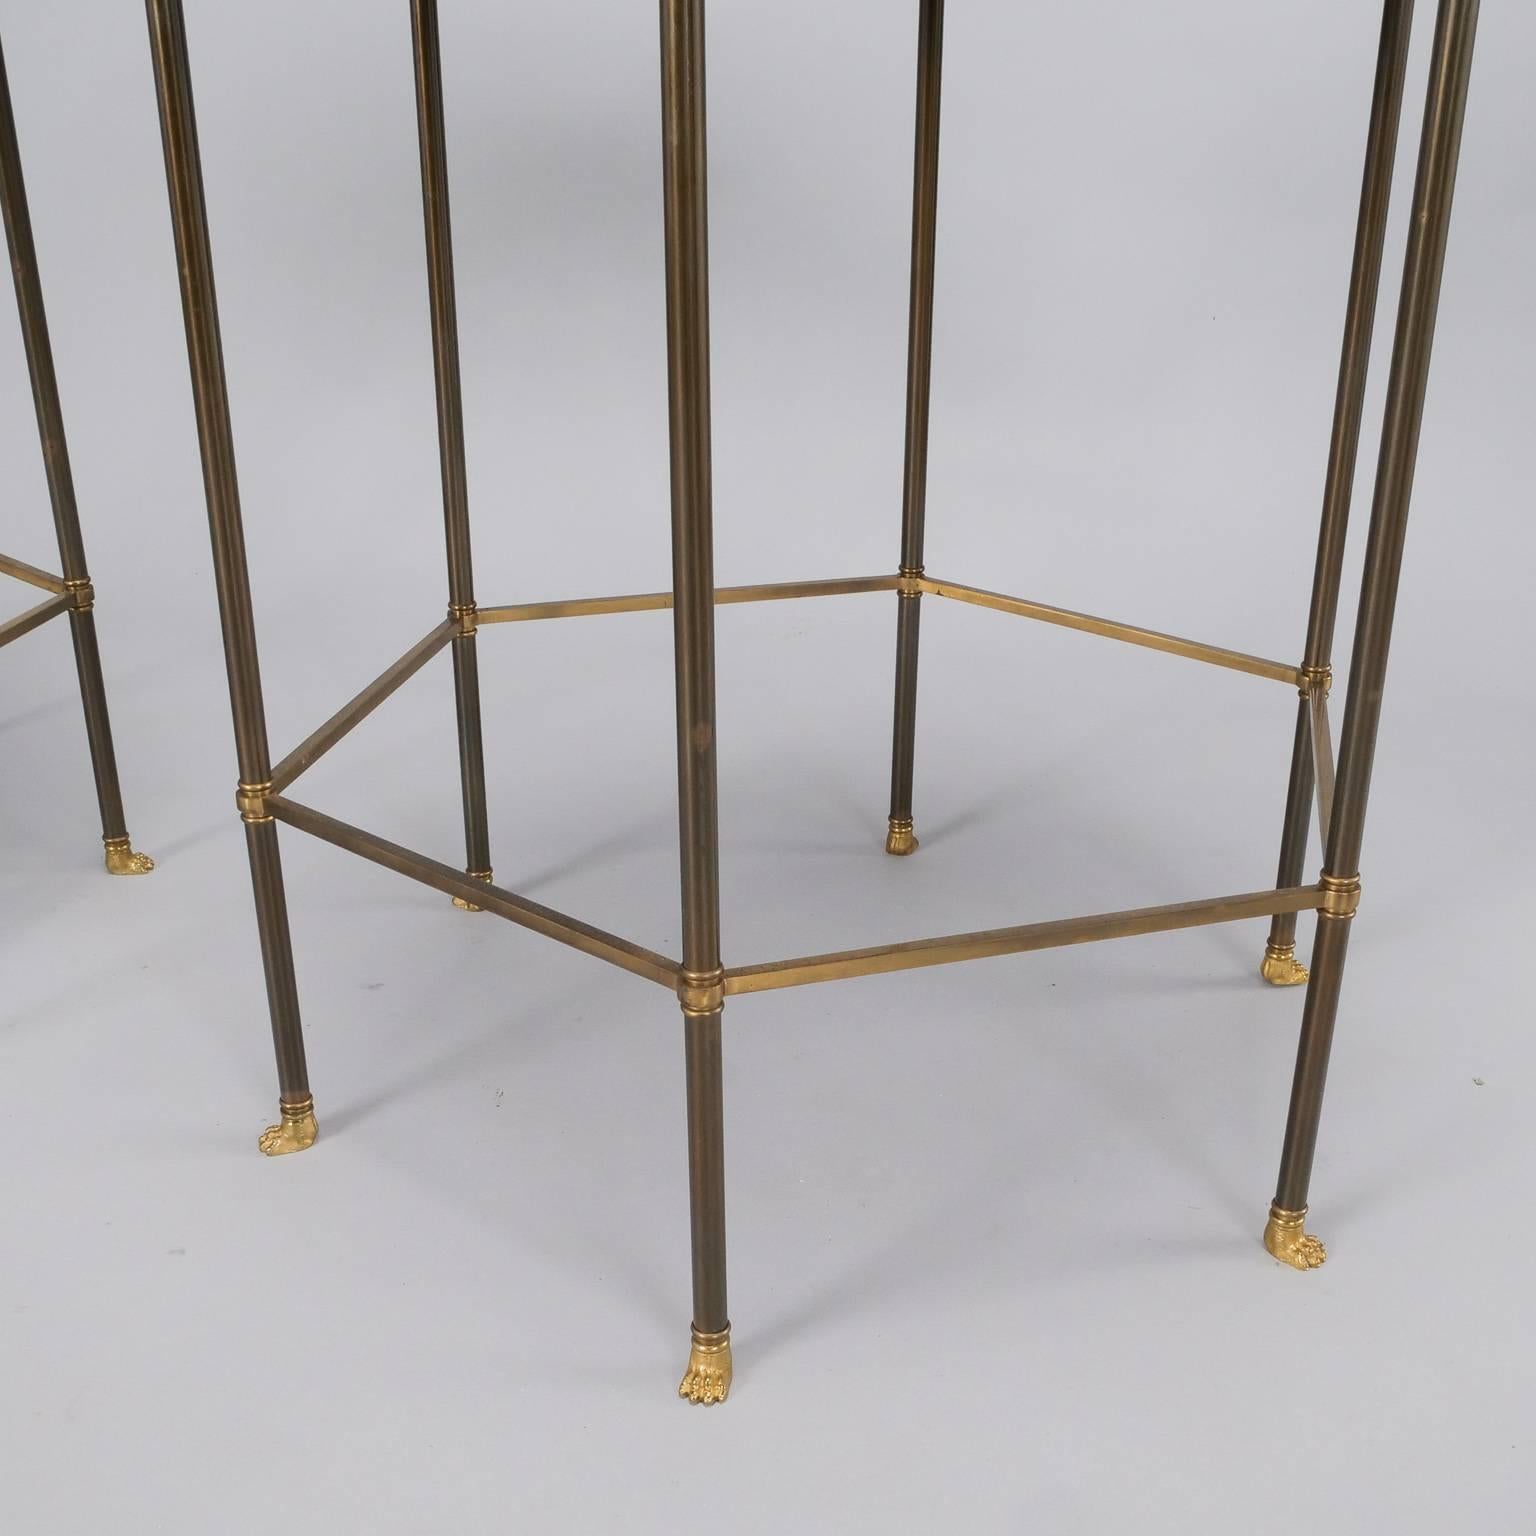 Pair of circa 1960s six-sided brass frame side tables from famed French maker Maison Charles. Each table has six slender brass legs with lion style feet, six sided brass stretcher, delicate brass gallery and tortoise look enameled table tops. Sold